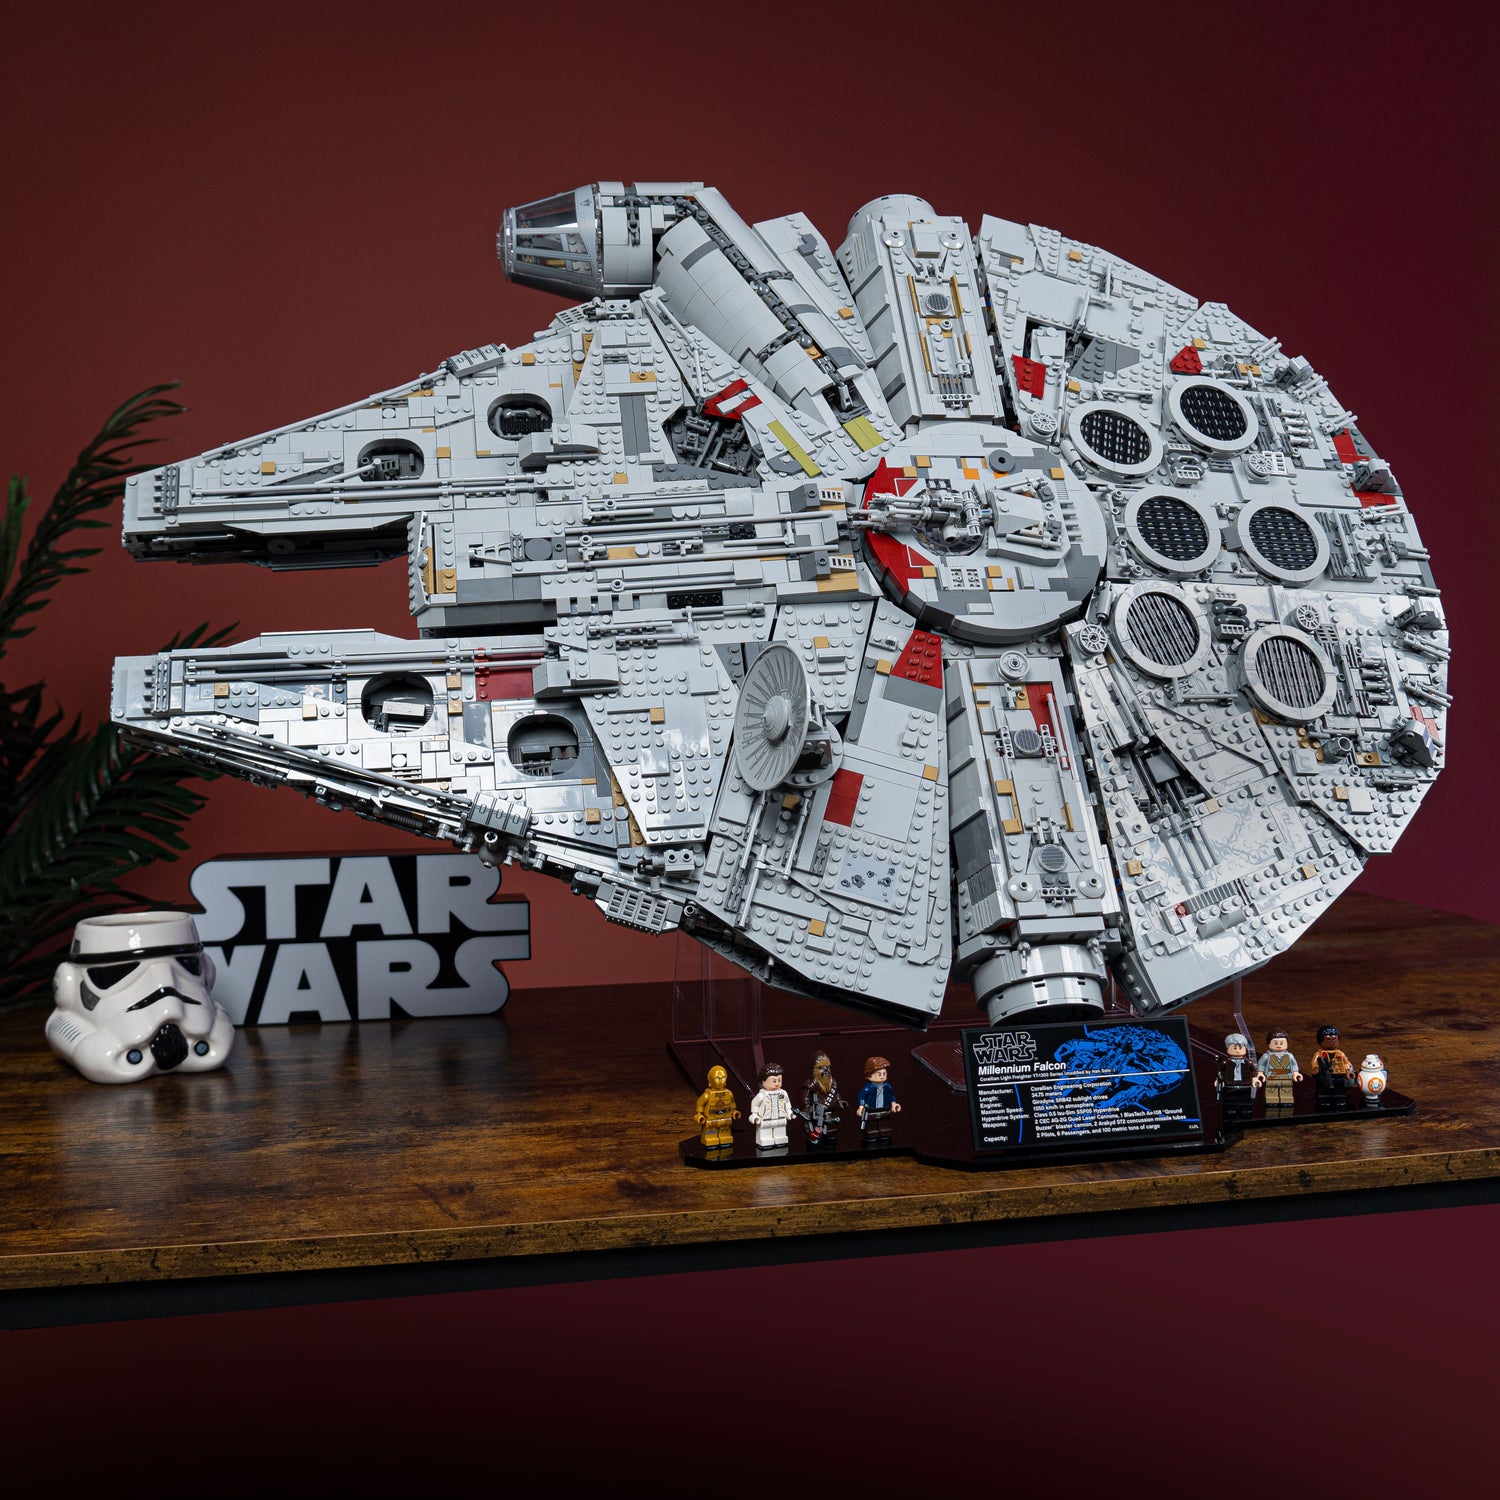 The definitive UCS Millennium Falcon display stand.